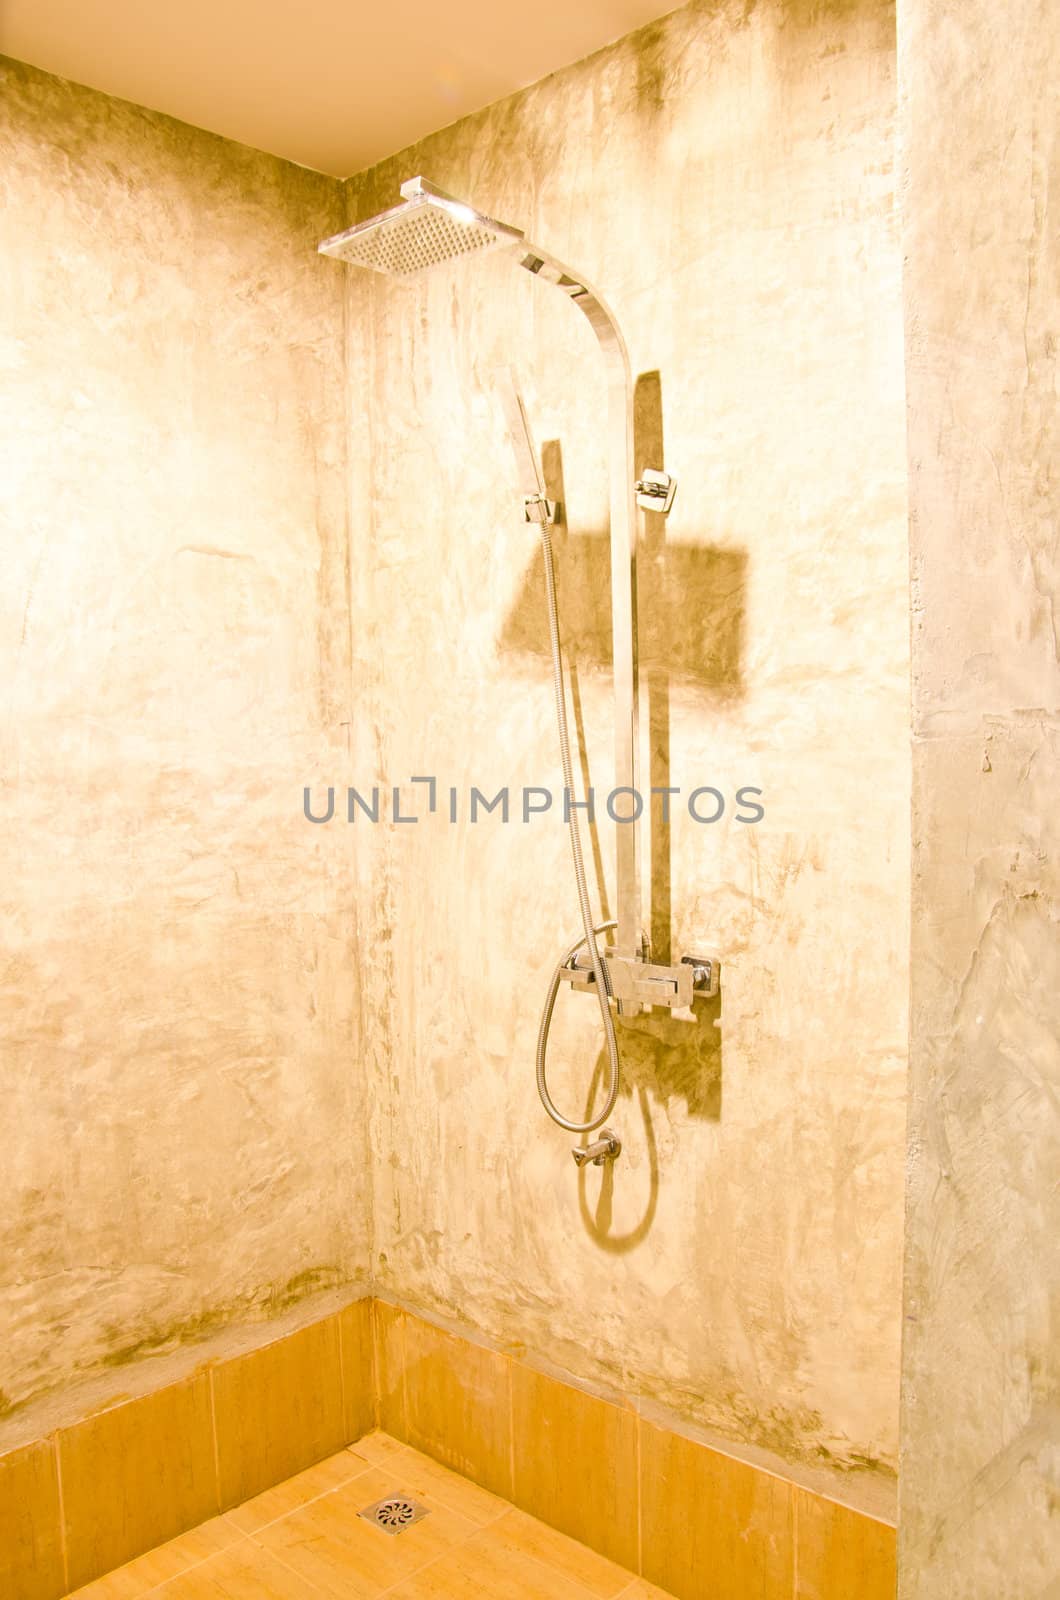 Shower in bathroom  by chatchai